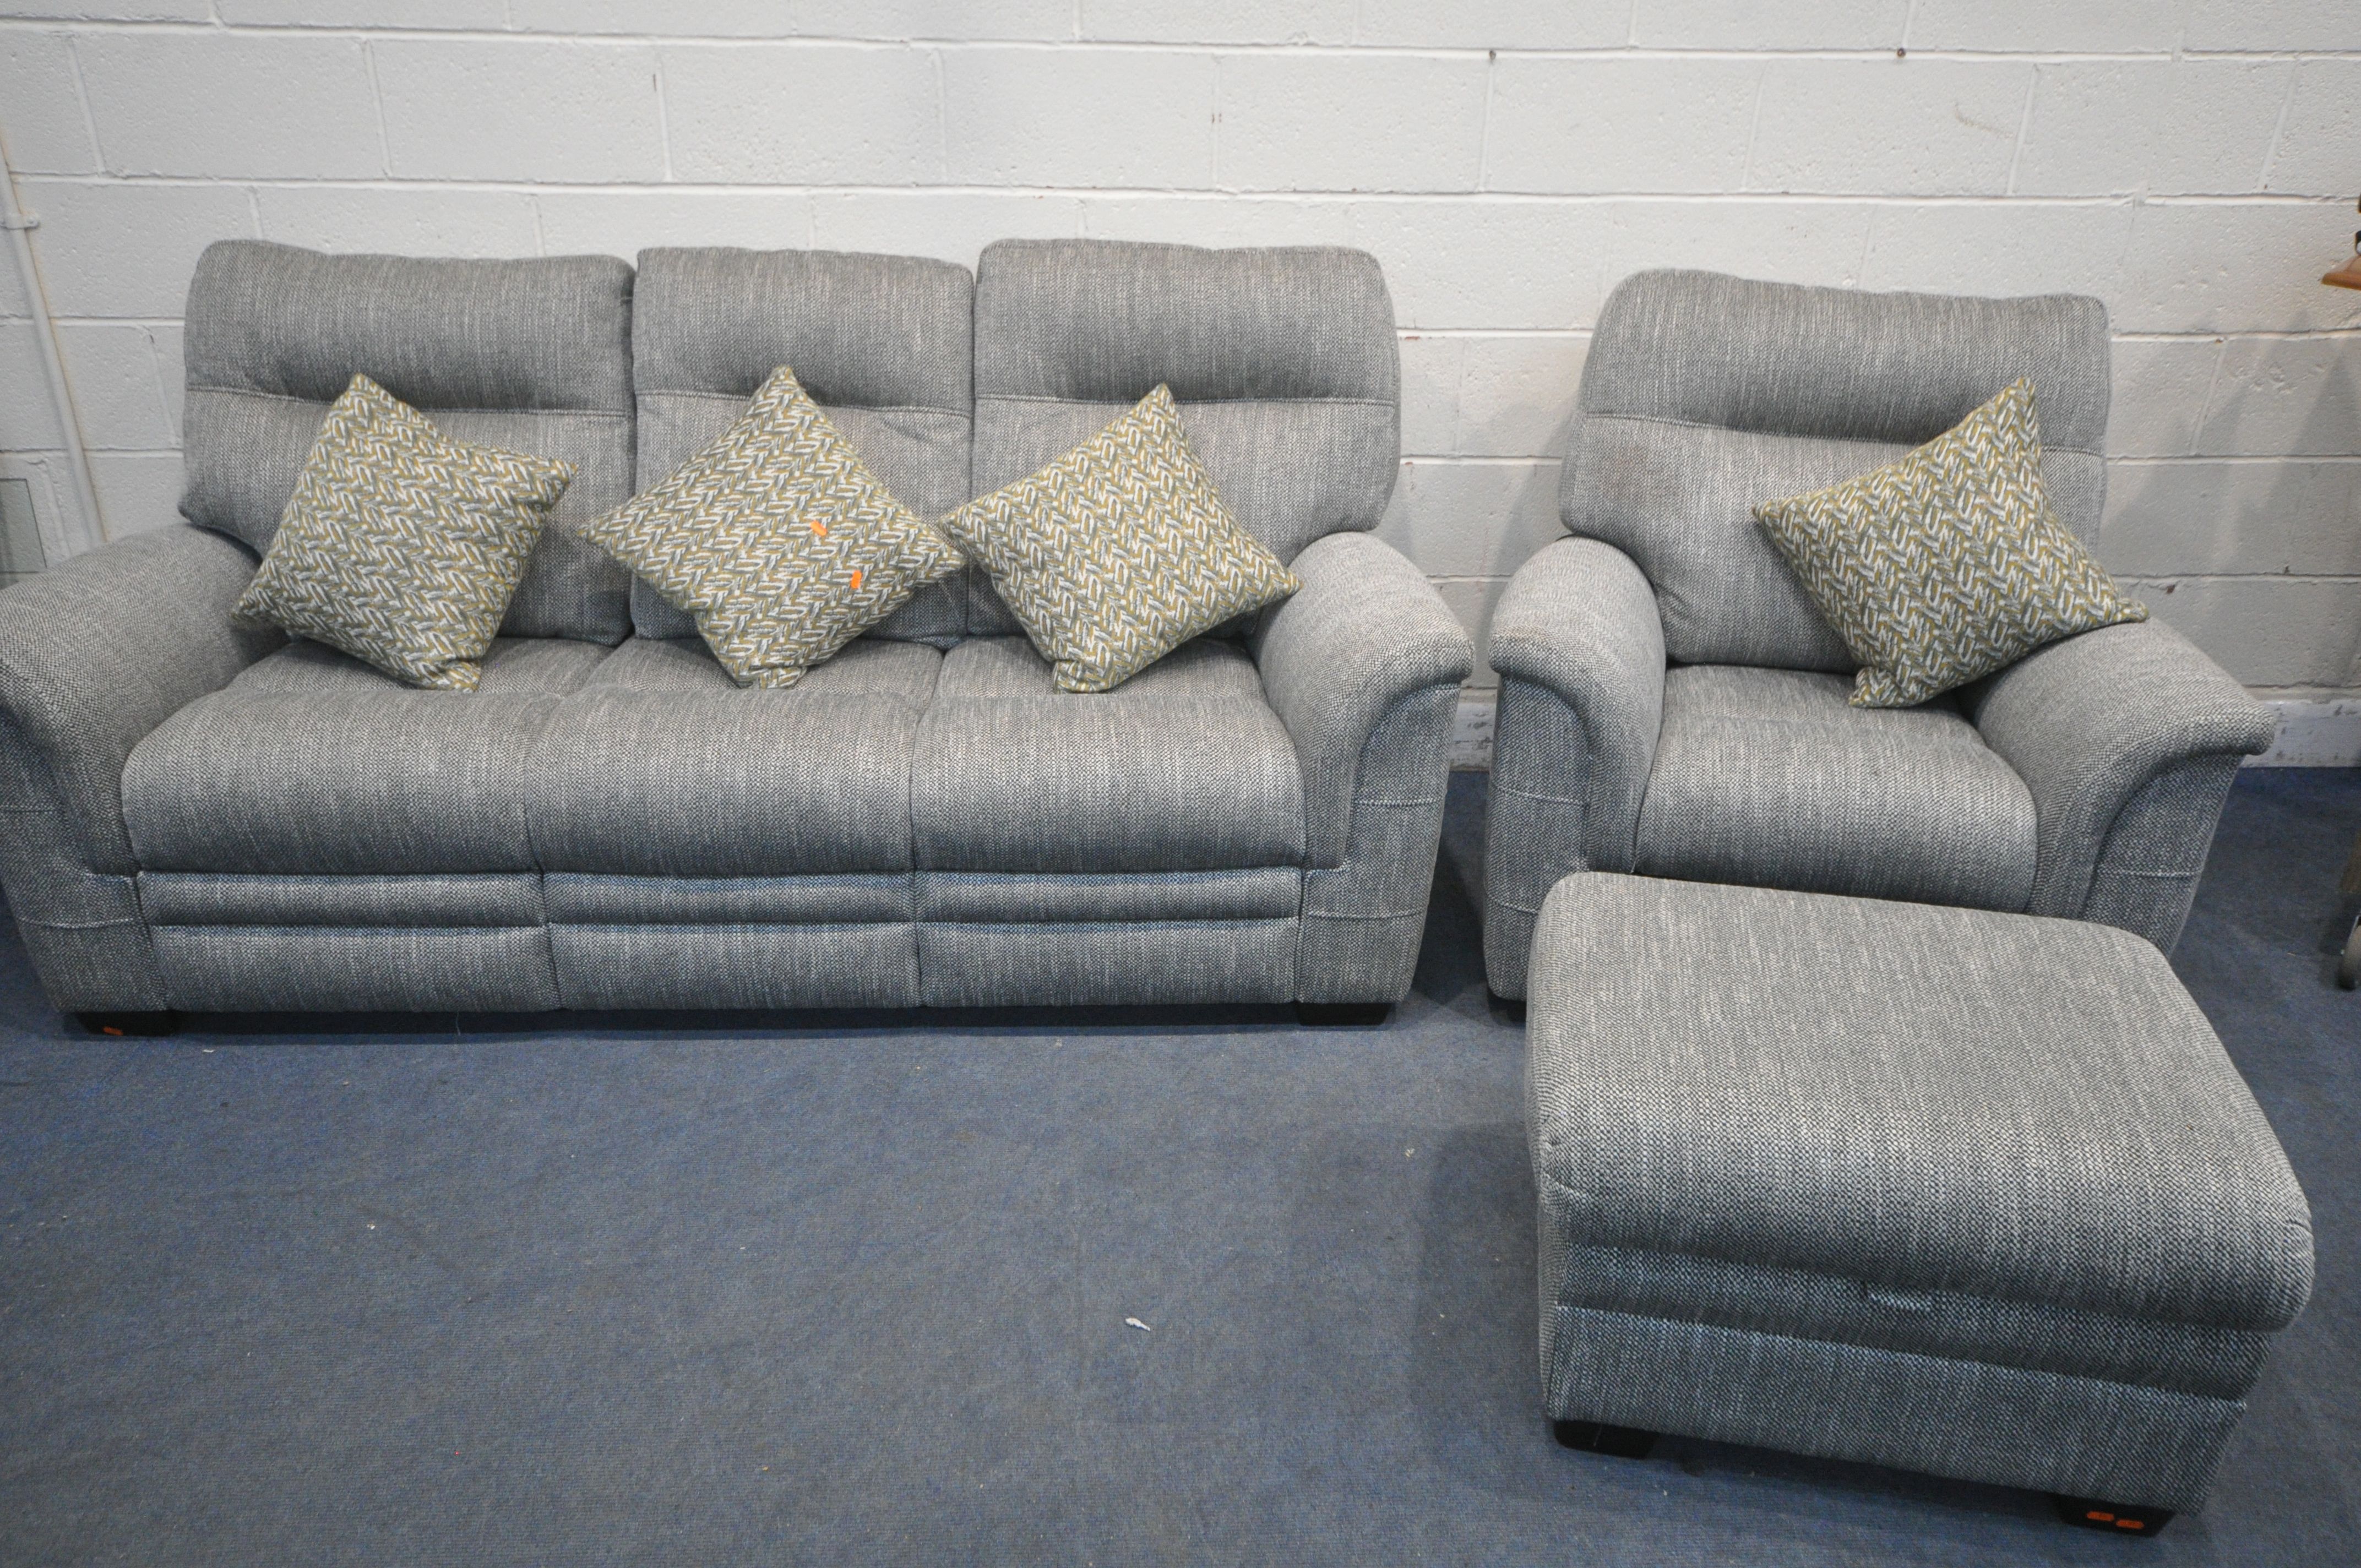 A PARKER KNOLL BLACK AND WHITE PATTERNED THREE PIECE LOUNGE SUITE, comprising a three seater settee,